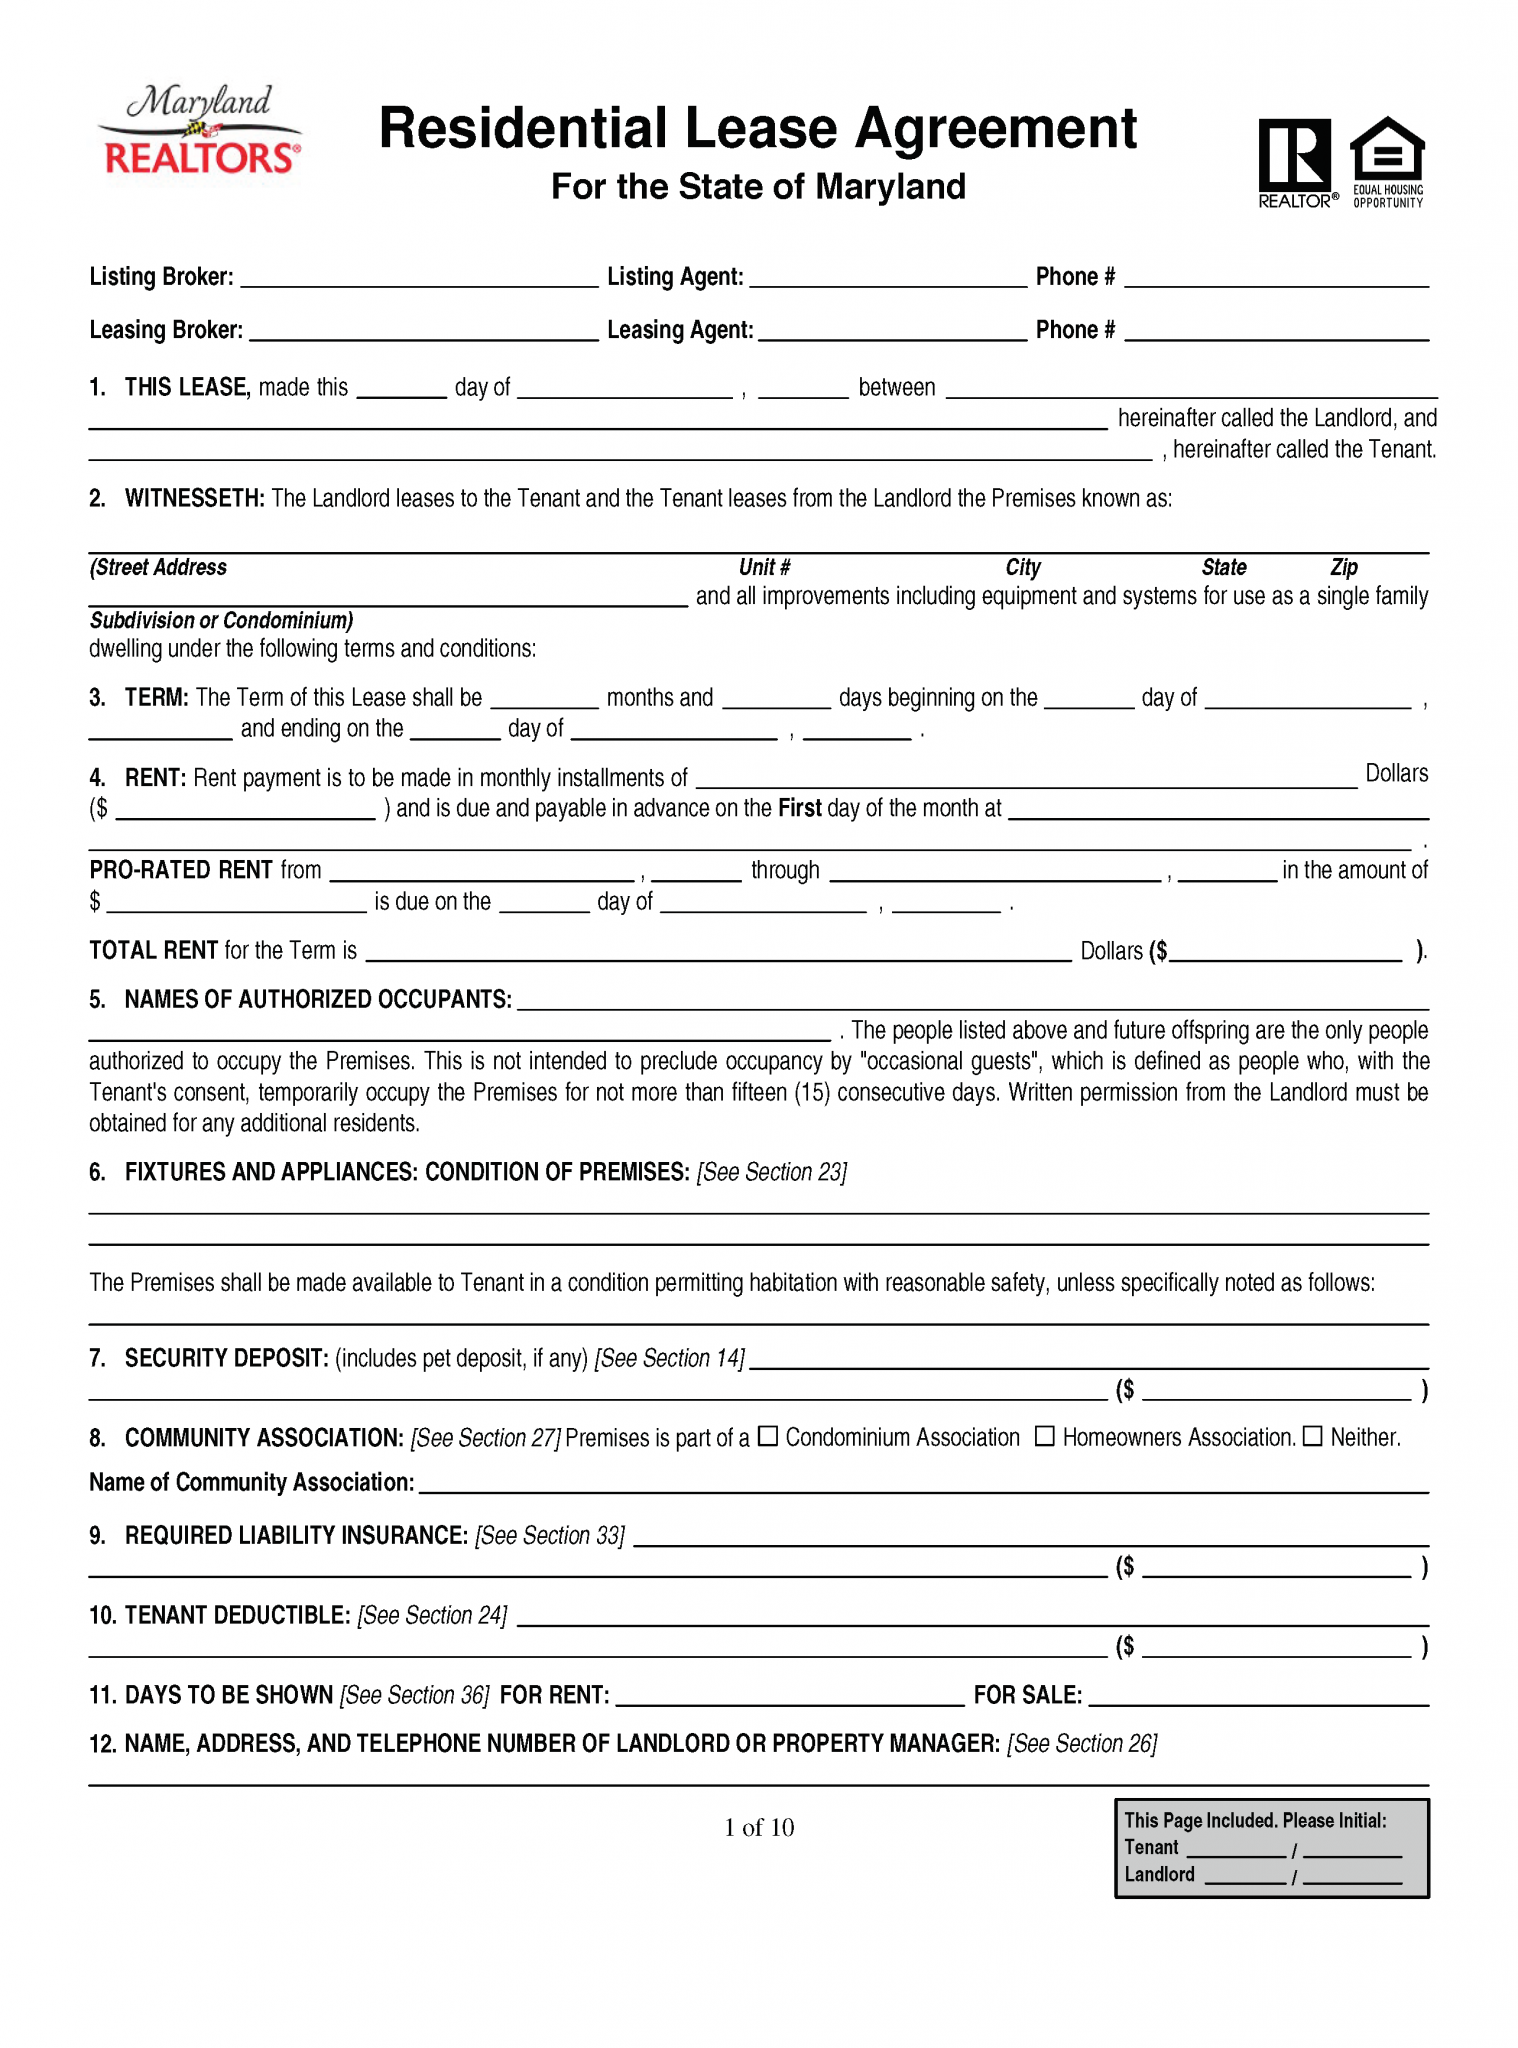 Free Printable Maryland Residential Lease Agreement